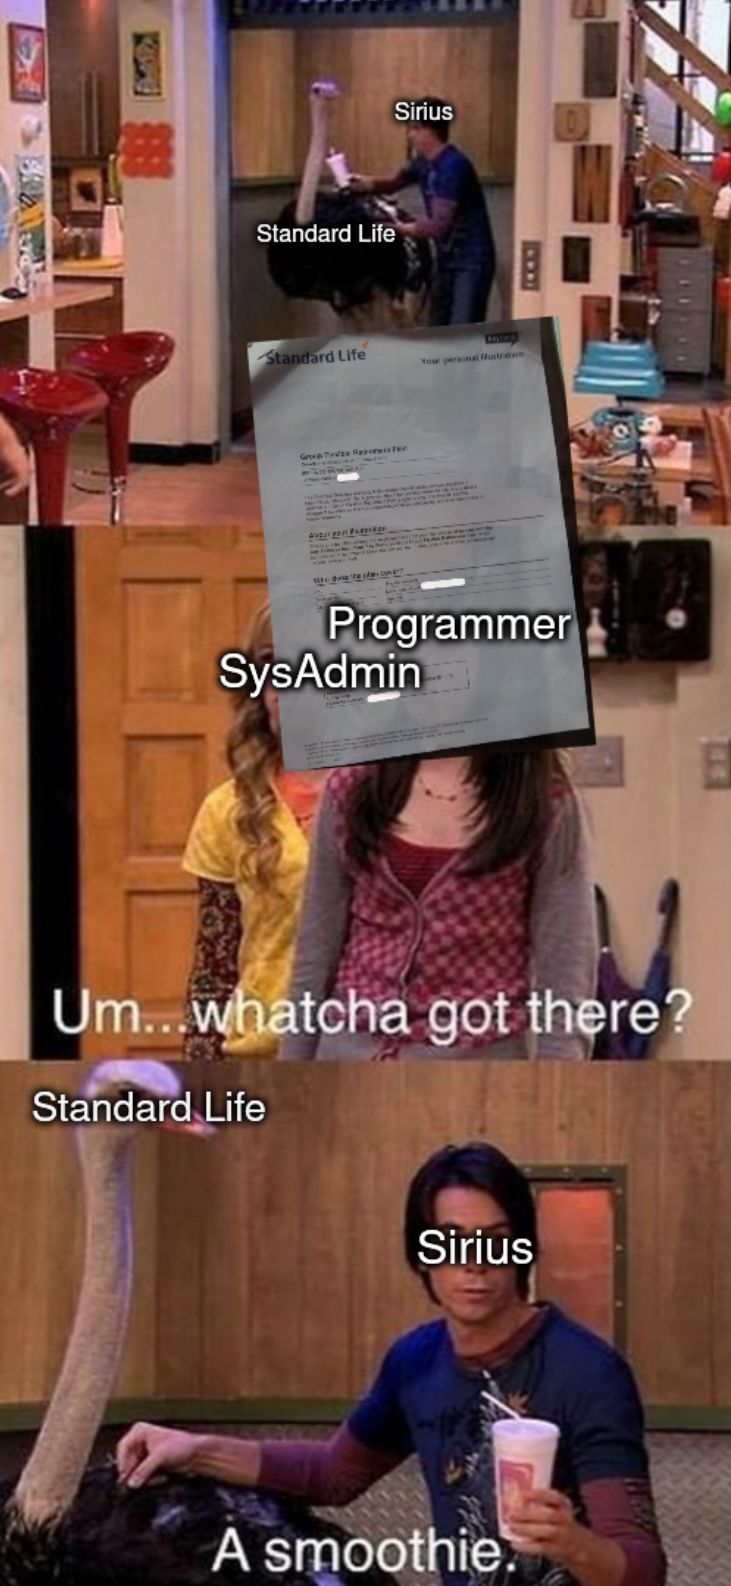 Sirius and Standard Life to Programmer/SysAdmin: Um... watcha got there? A smoothie